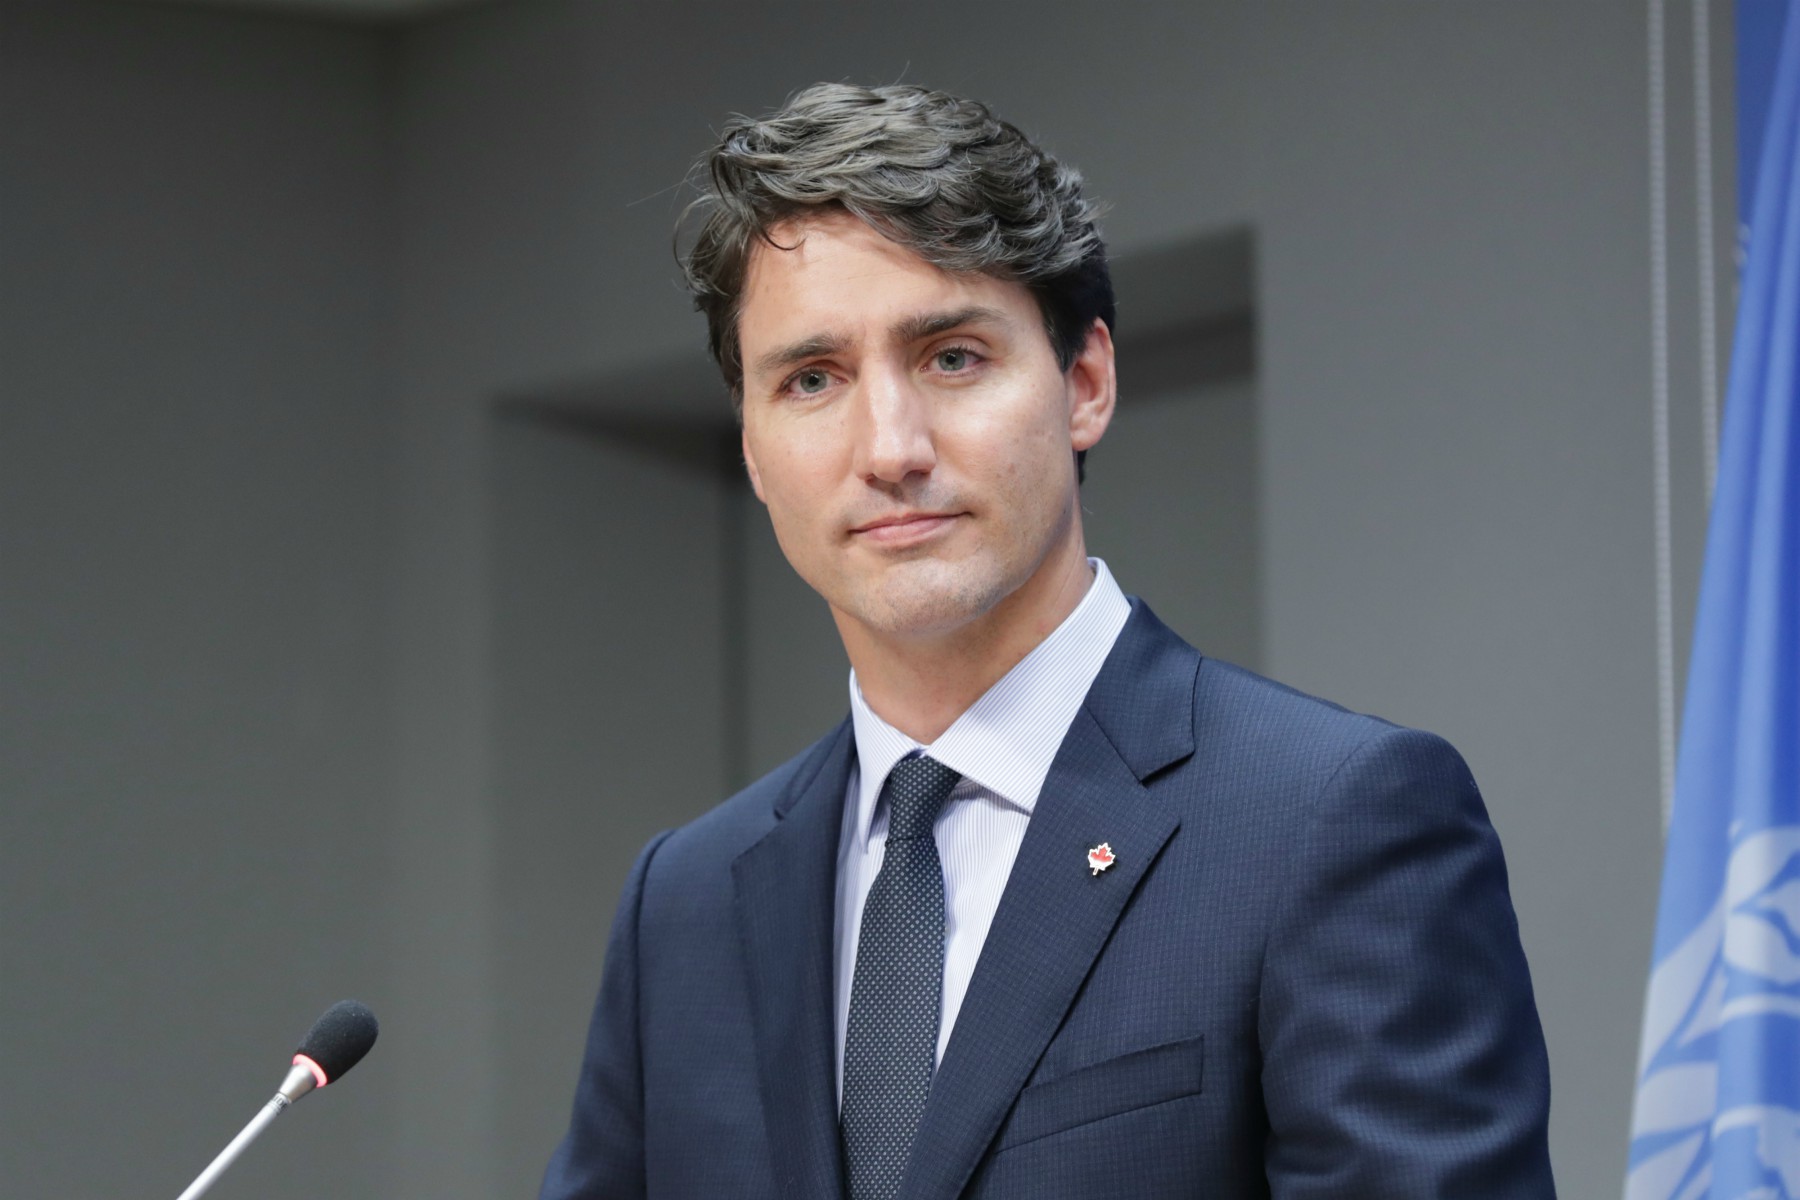 Canada: The government is silent on the rules for the purchase of “offensive” weapons